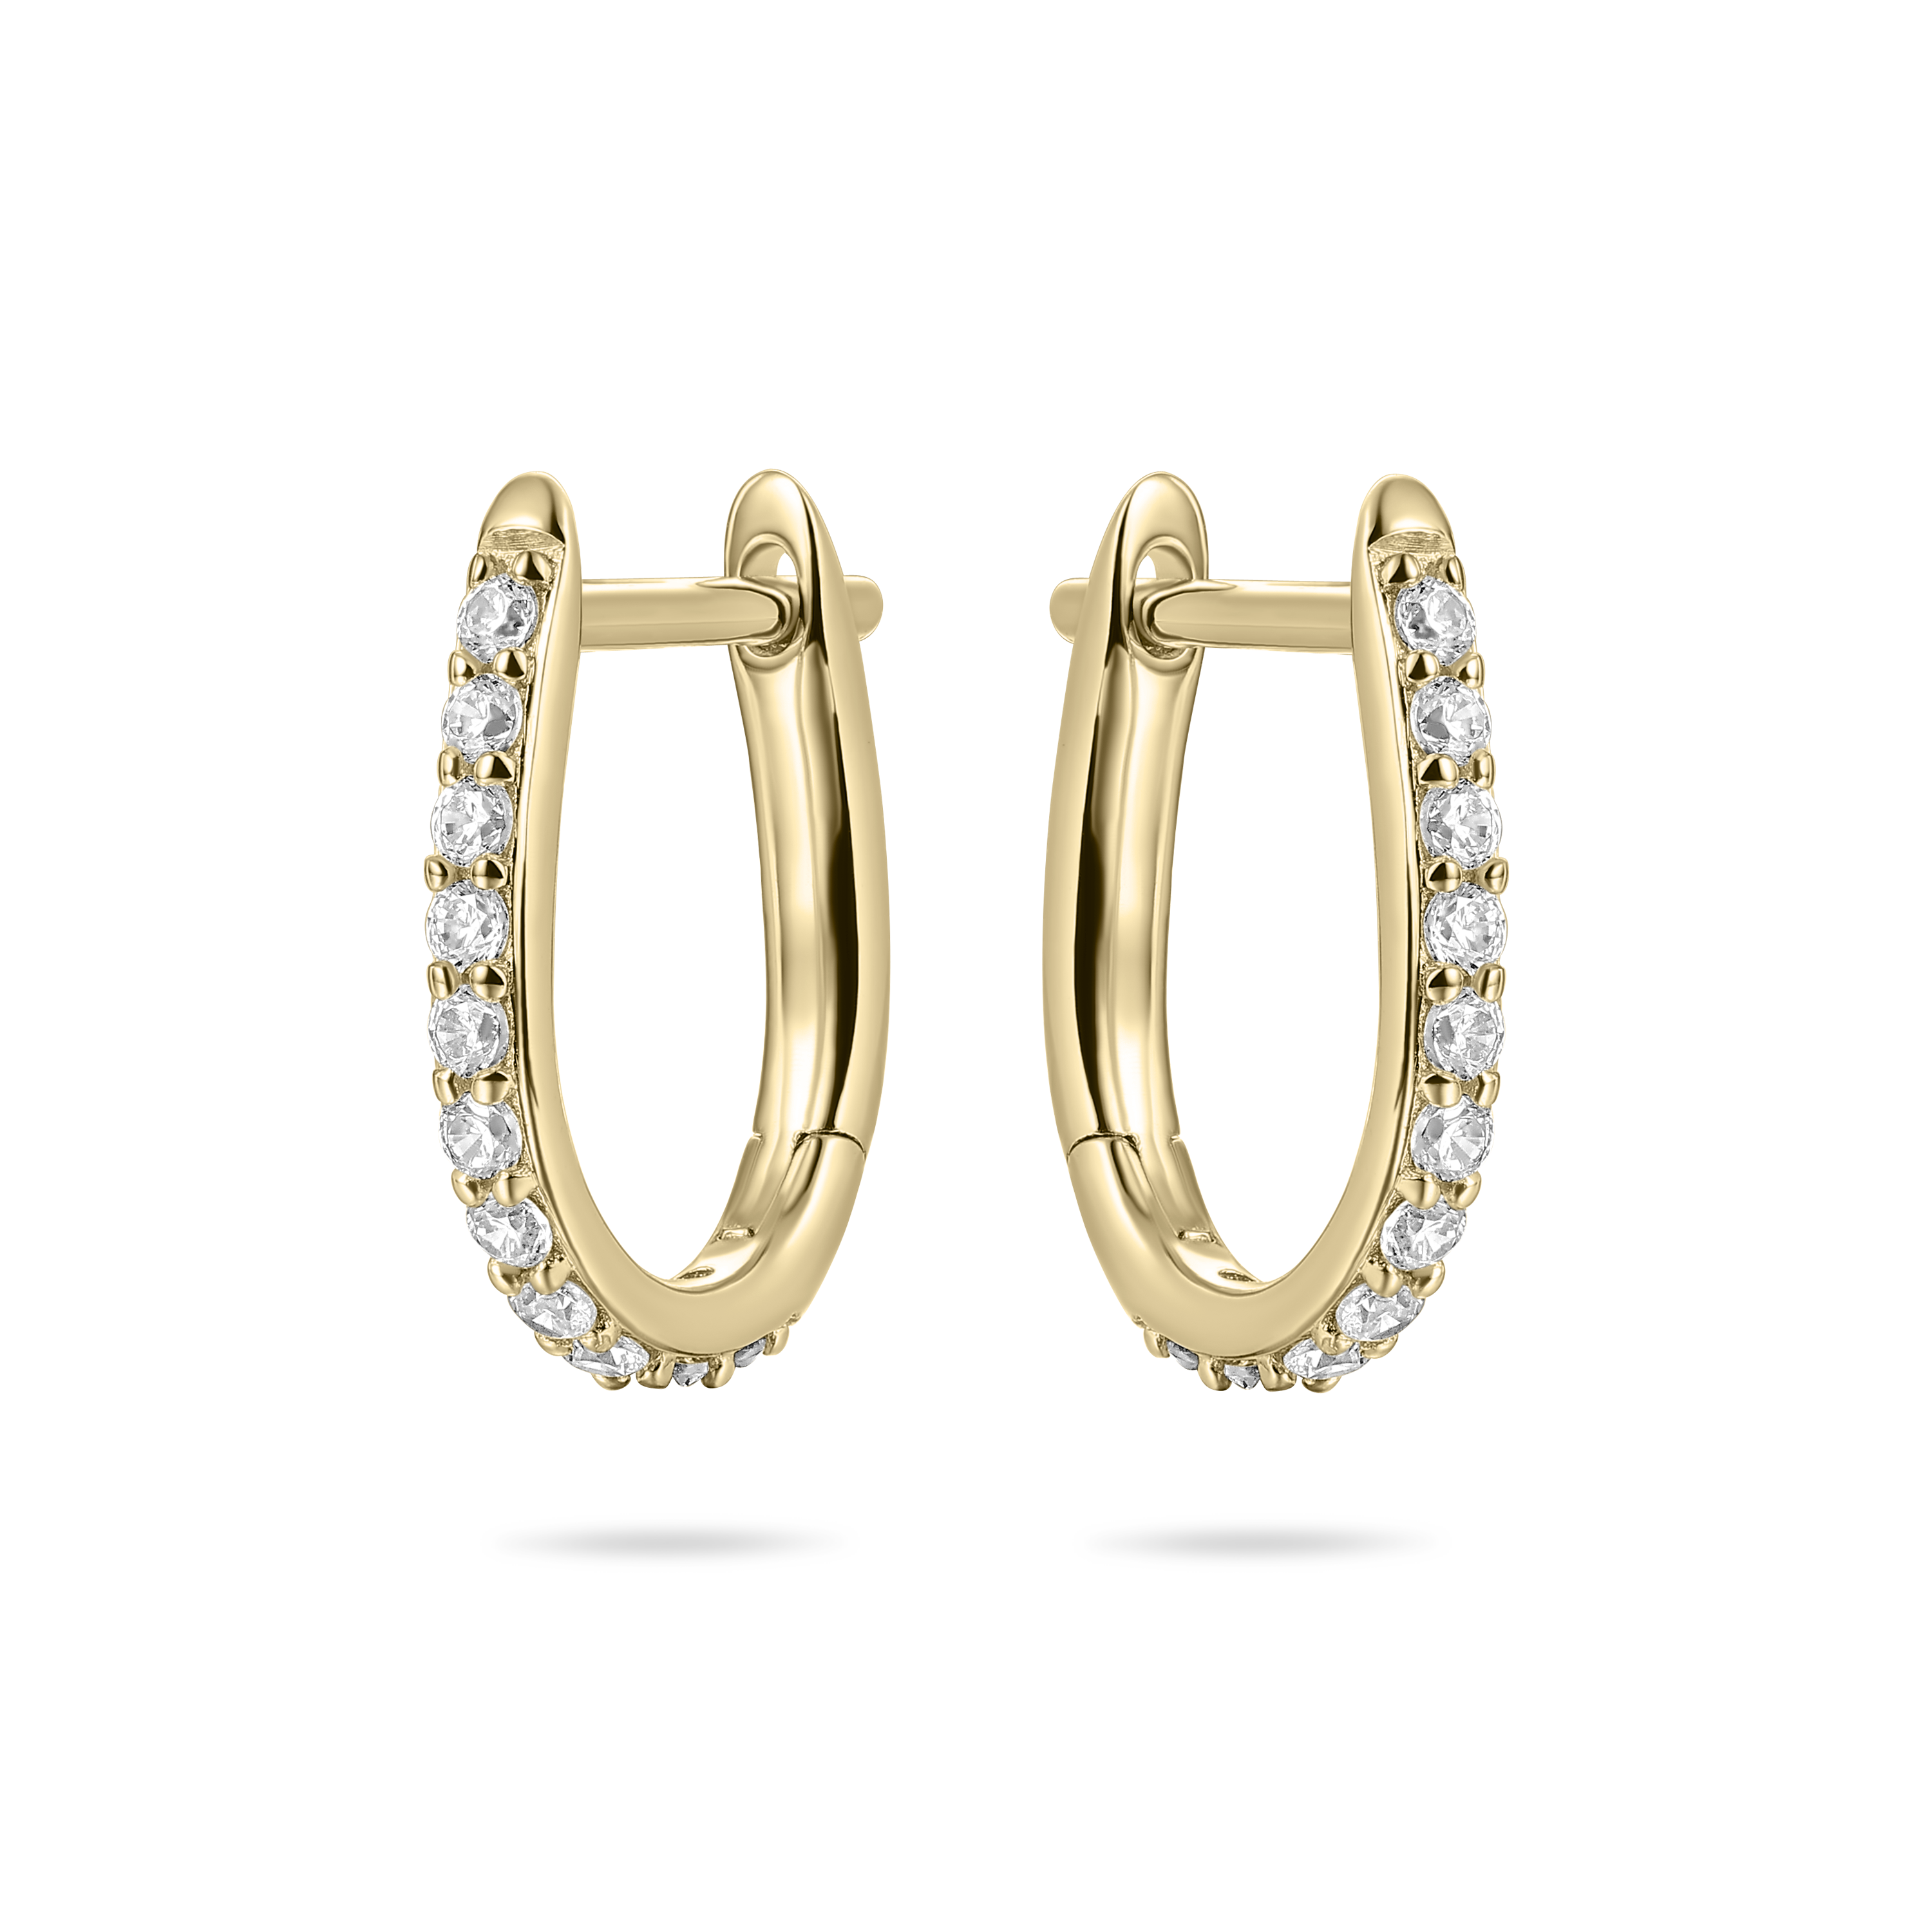 Gisser Jewels Silver Gold Plated Pave Oval Hoop Earrings